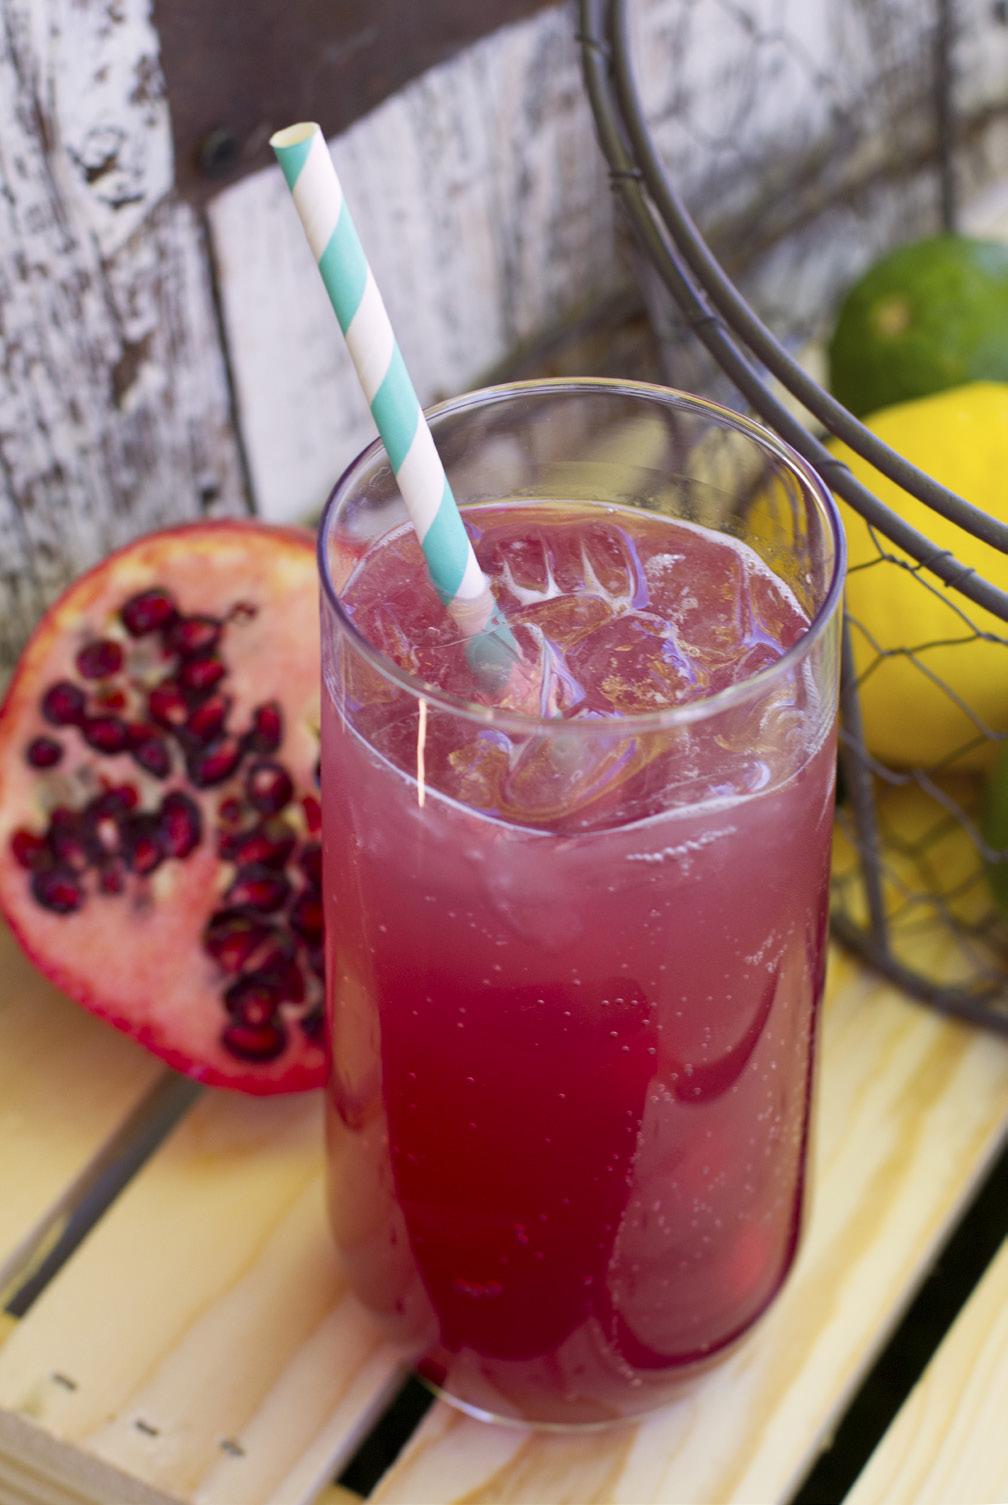 Super Spritzer Sweet lemonade meets bubbly soda water in a perfectly revitalizing spritzer. Feel even better about your summer beverage choice by adding the power of superfruits.